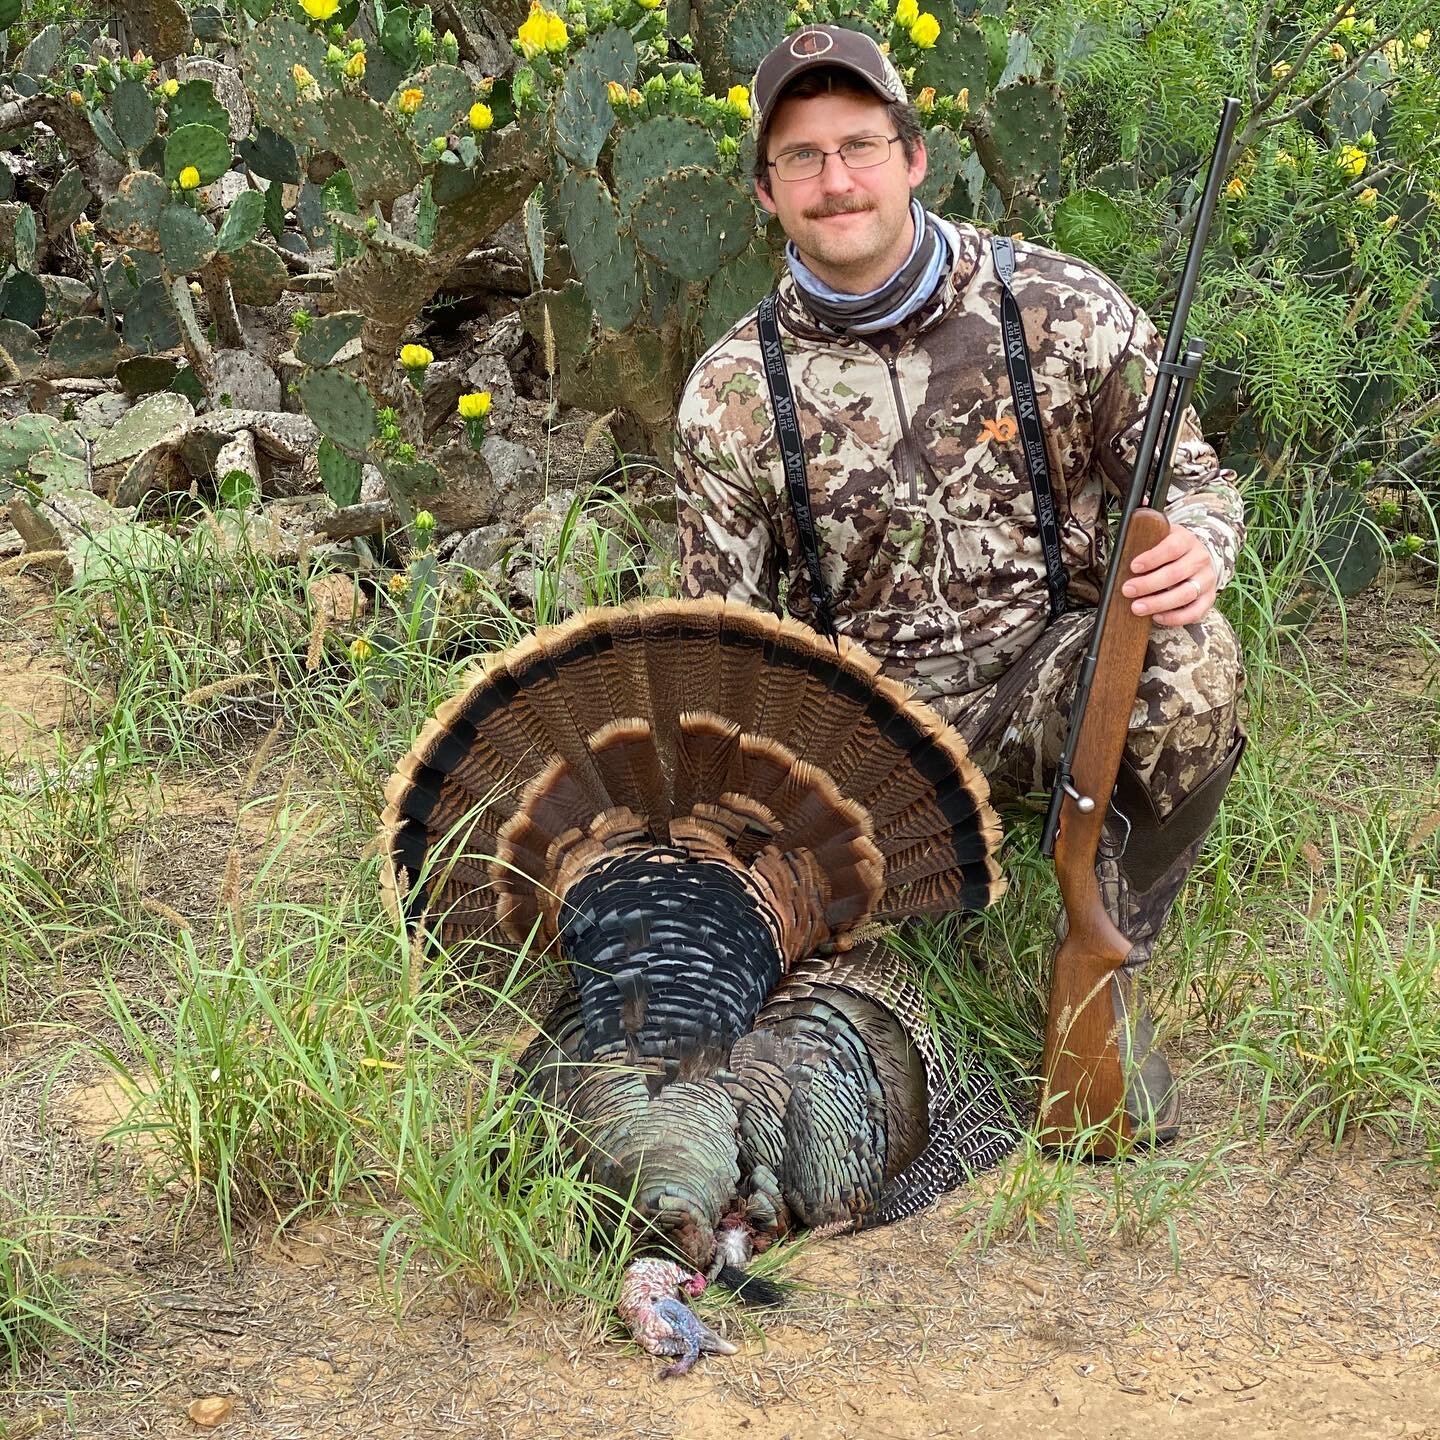 Texas Hunting Lease Lawyer Nathaniel Gilbert on a South Texas Turkey hunt with his grandfather’s .410. Hunting traditions are a vital part of Nate’s life that he brings to his professional practice helping farmers, ranchers, and landowners with the…